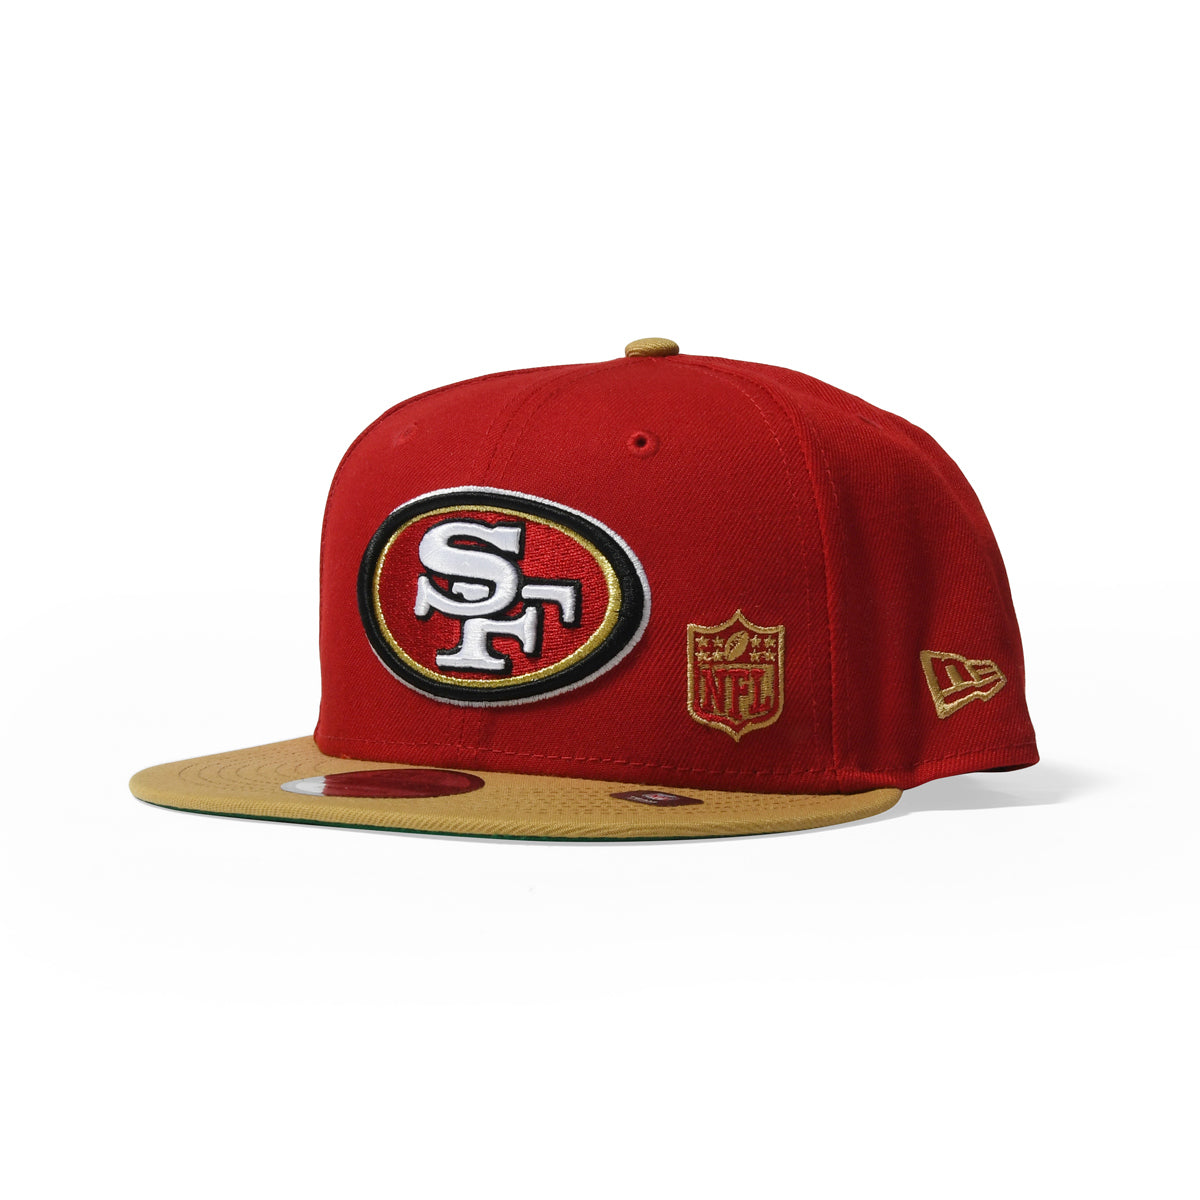 NEW ERA BlackLETTER ARCH SF 49ERS 9FIFTY